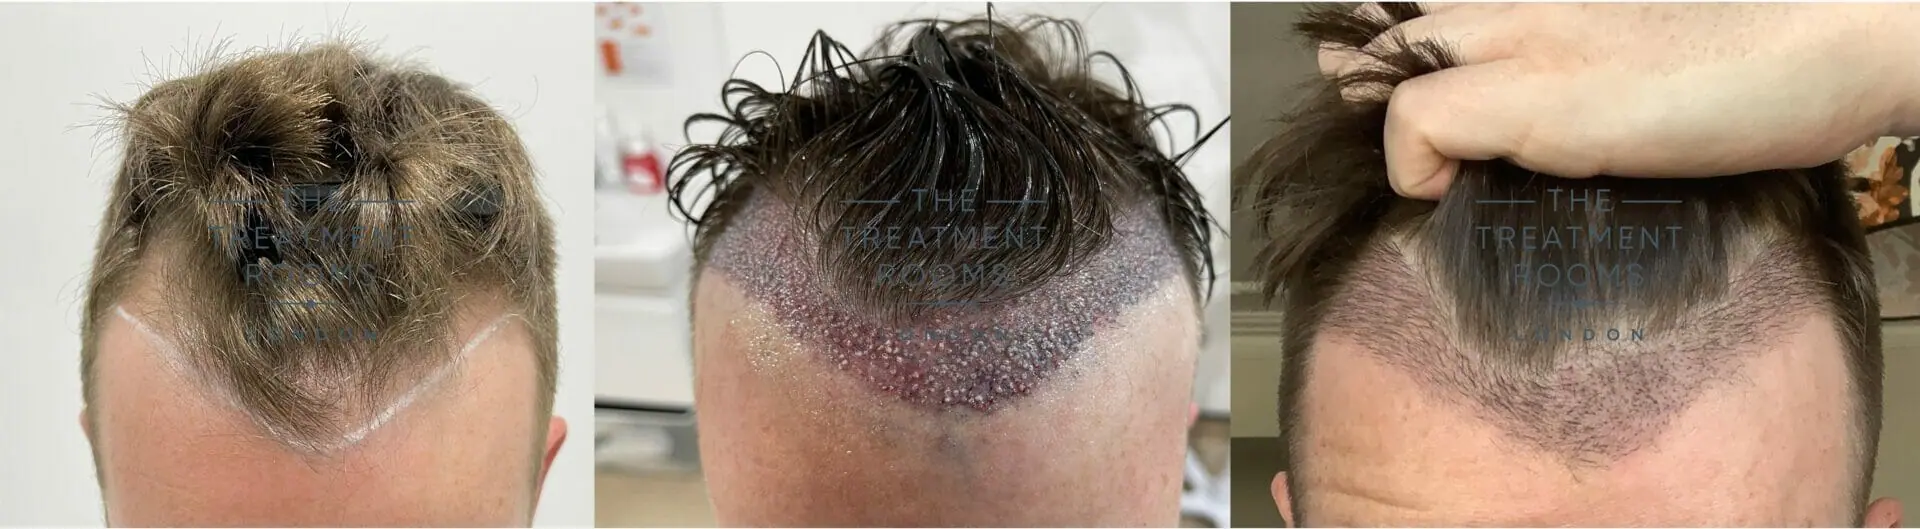 hair transplant cost in usa quora